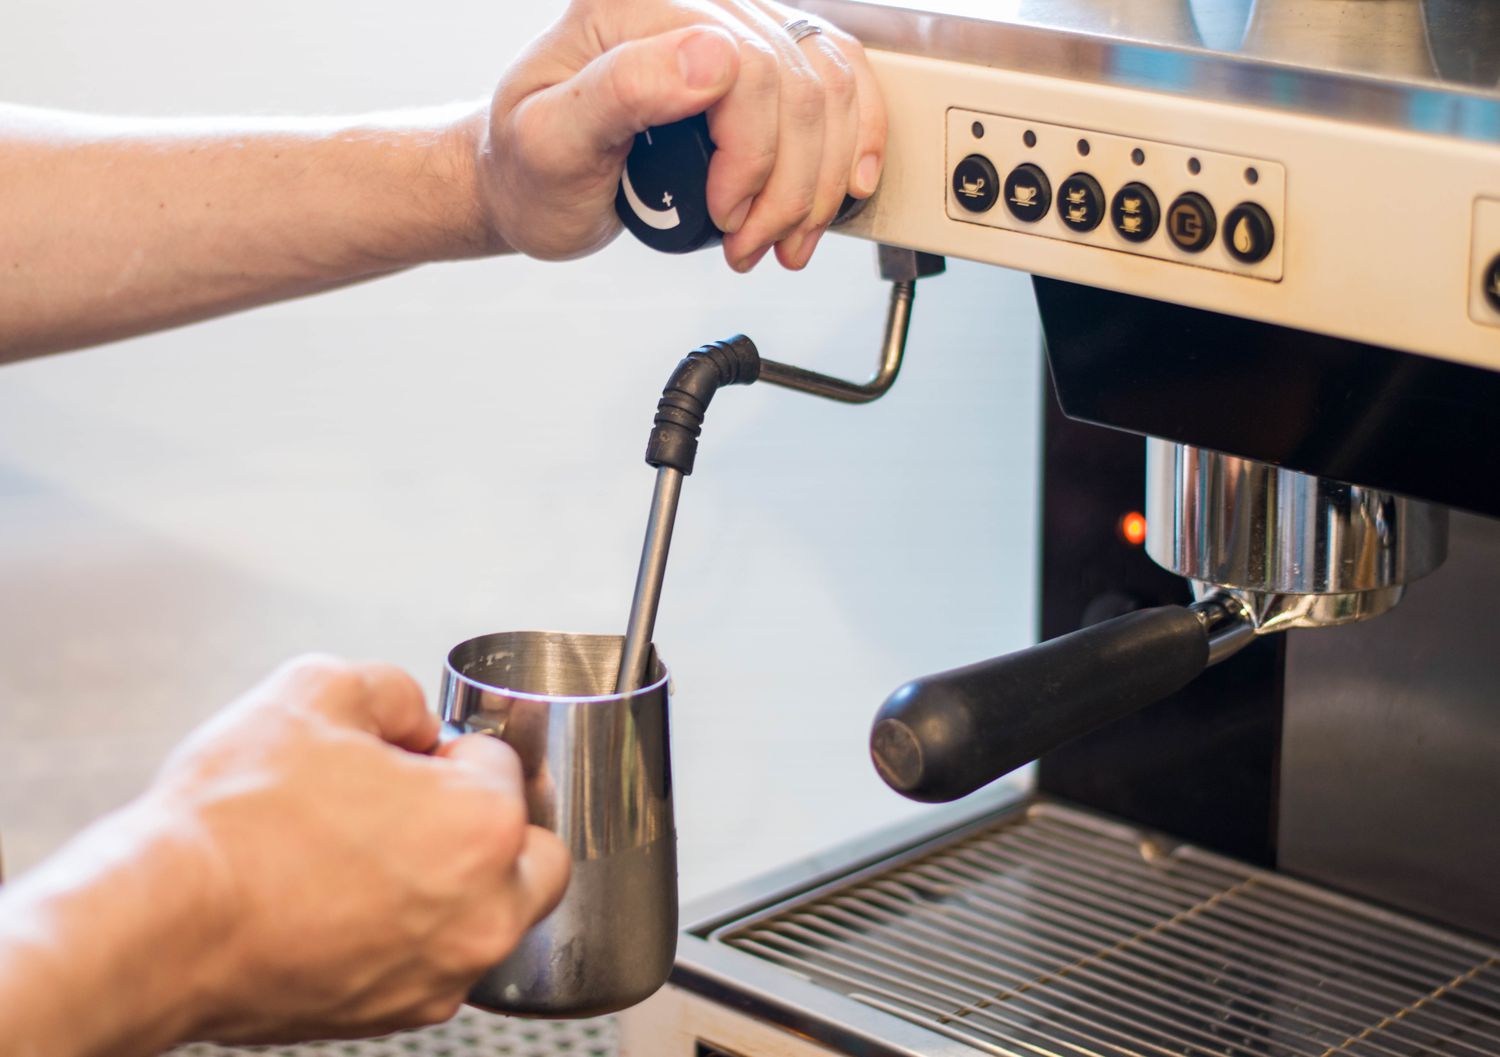 How To Use A Milk Frother On An Espresso Machine